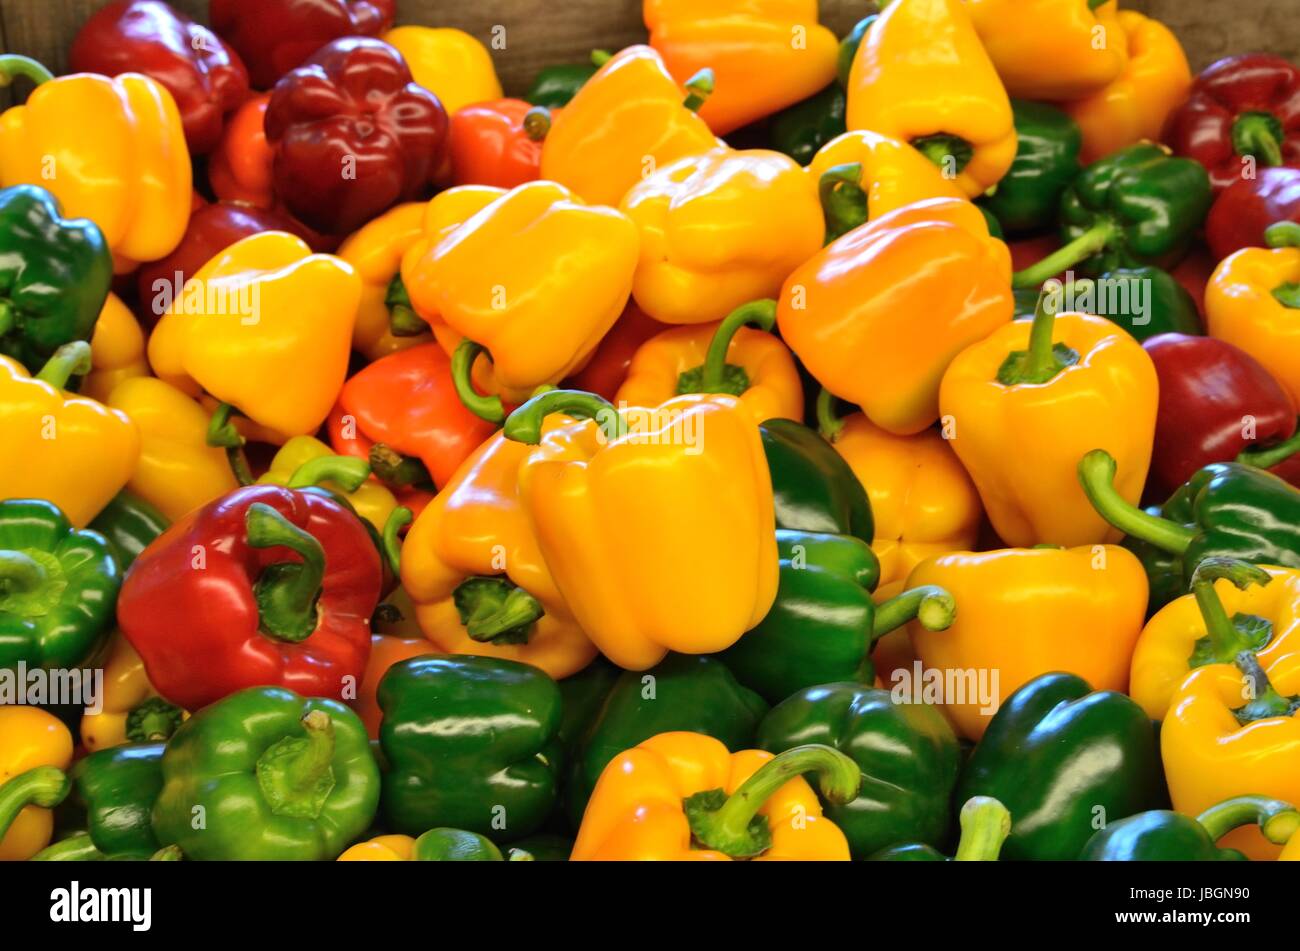 peppers yellow,green and red Stock Photo